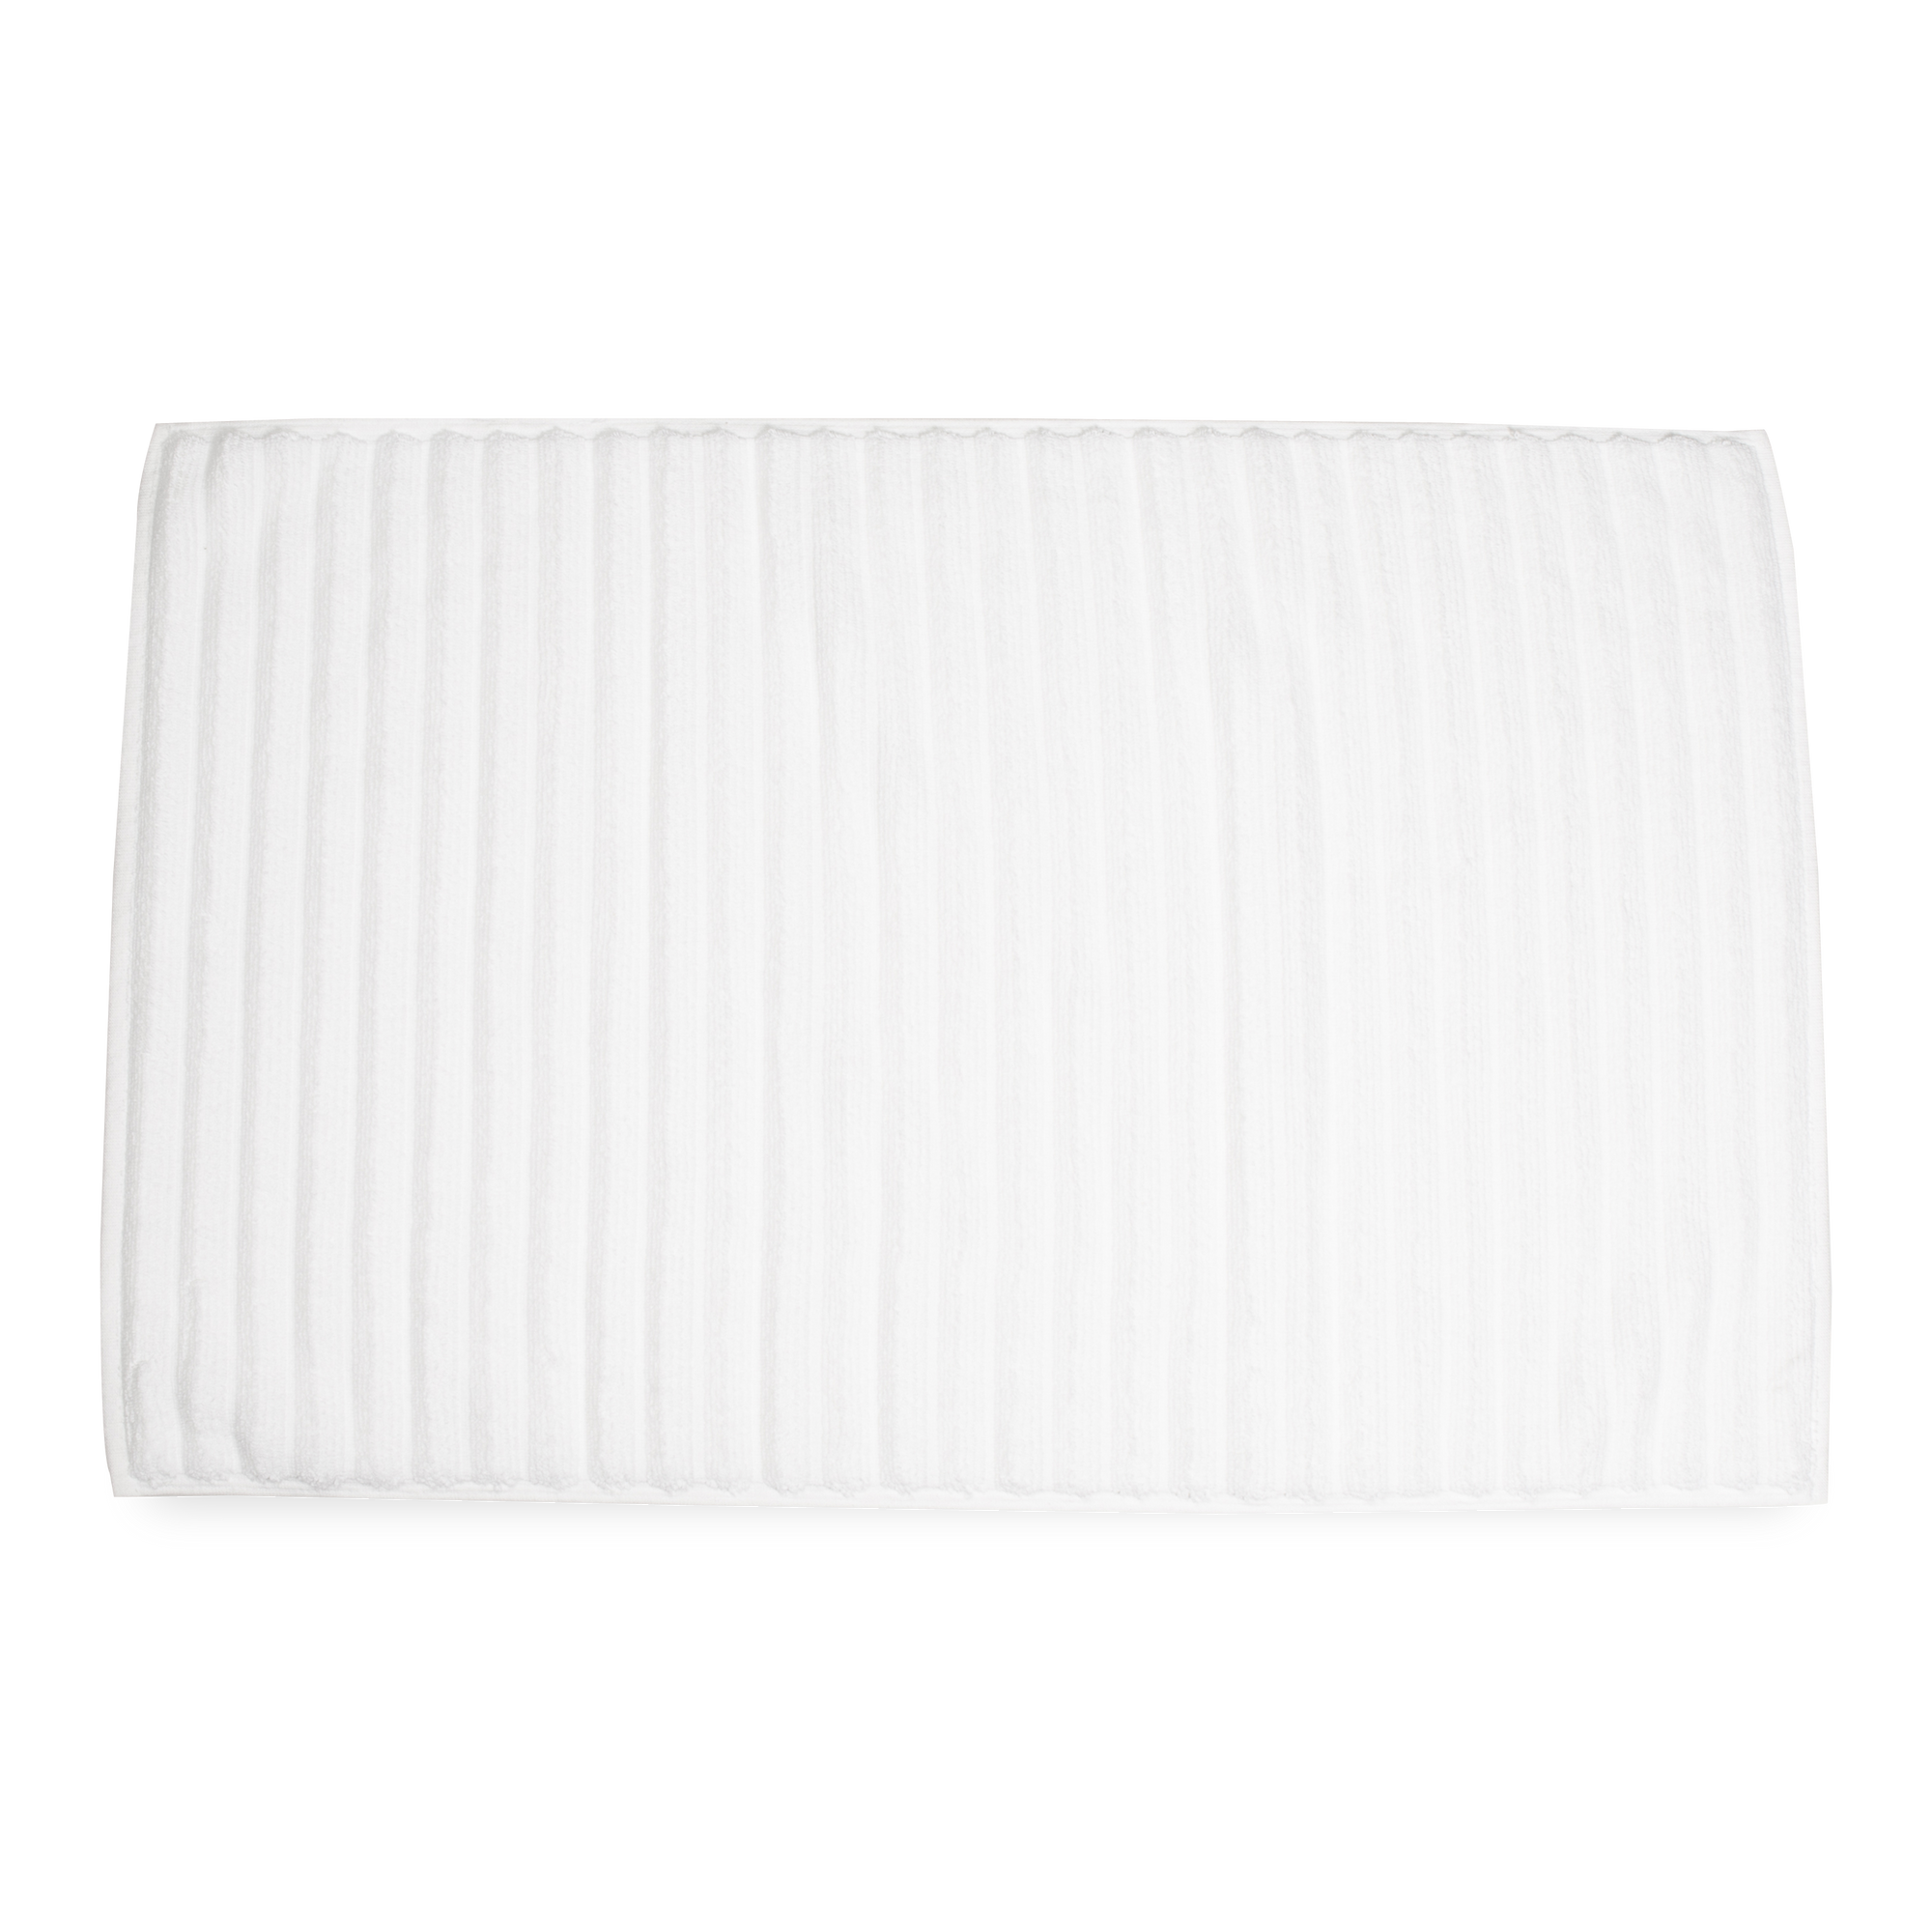 The Ribbed Bath Mat features slim terry ribs for a clean-lined look with exceptional absorbency.